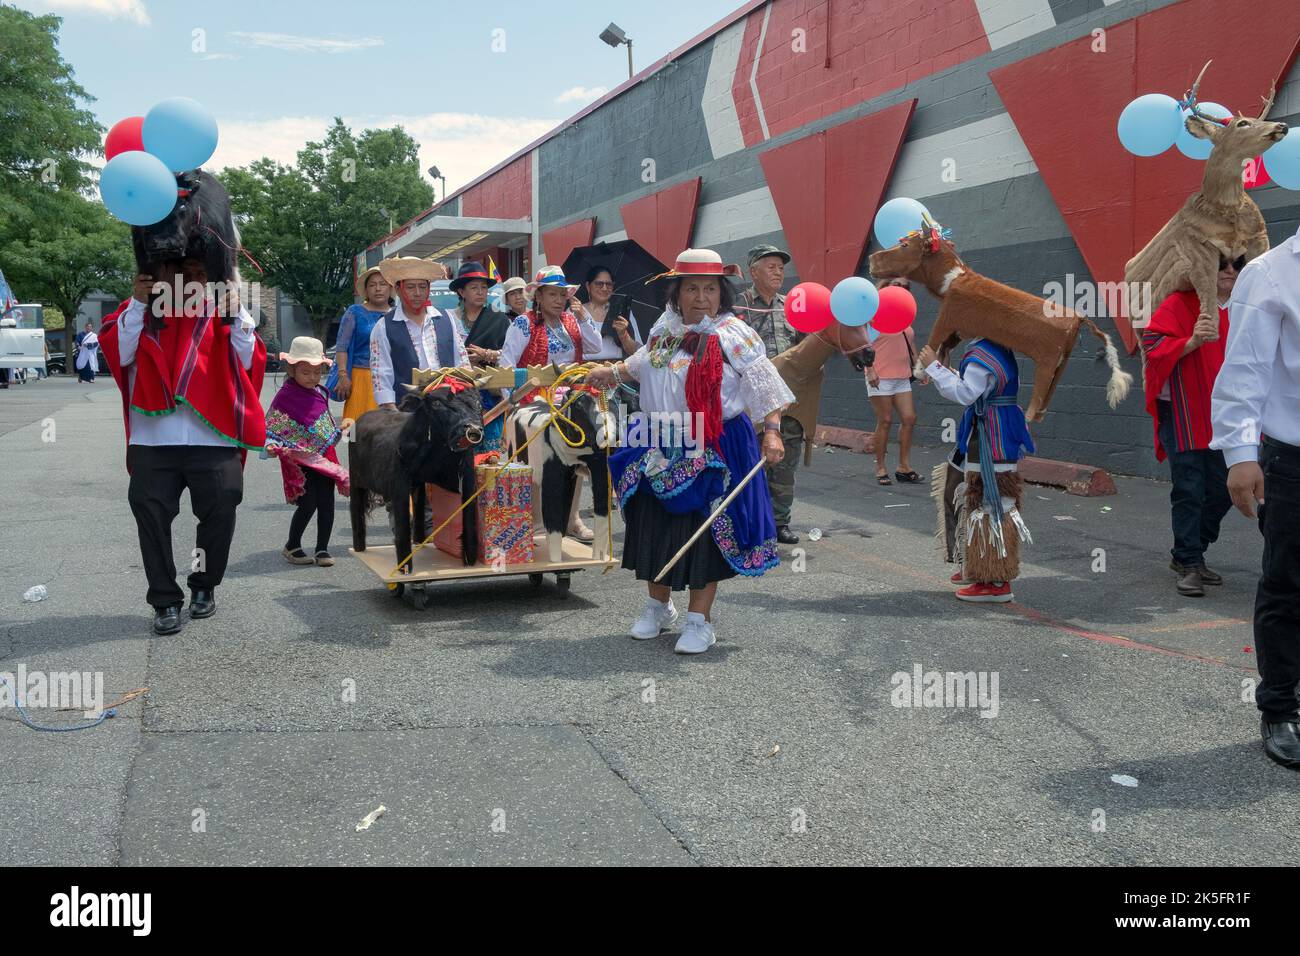 Marchers in traditional clothing and with wooden animal statues.at the Ecuadorian Parade NYC 2022 in Queens, New York. Stock Photo